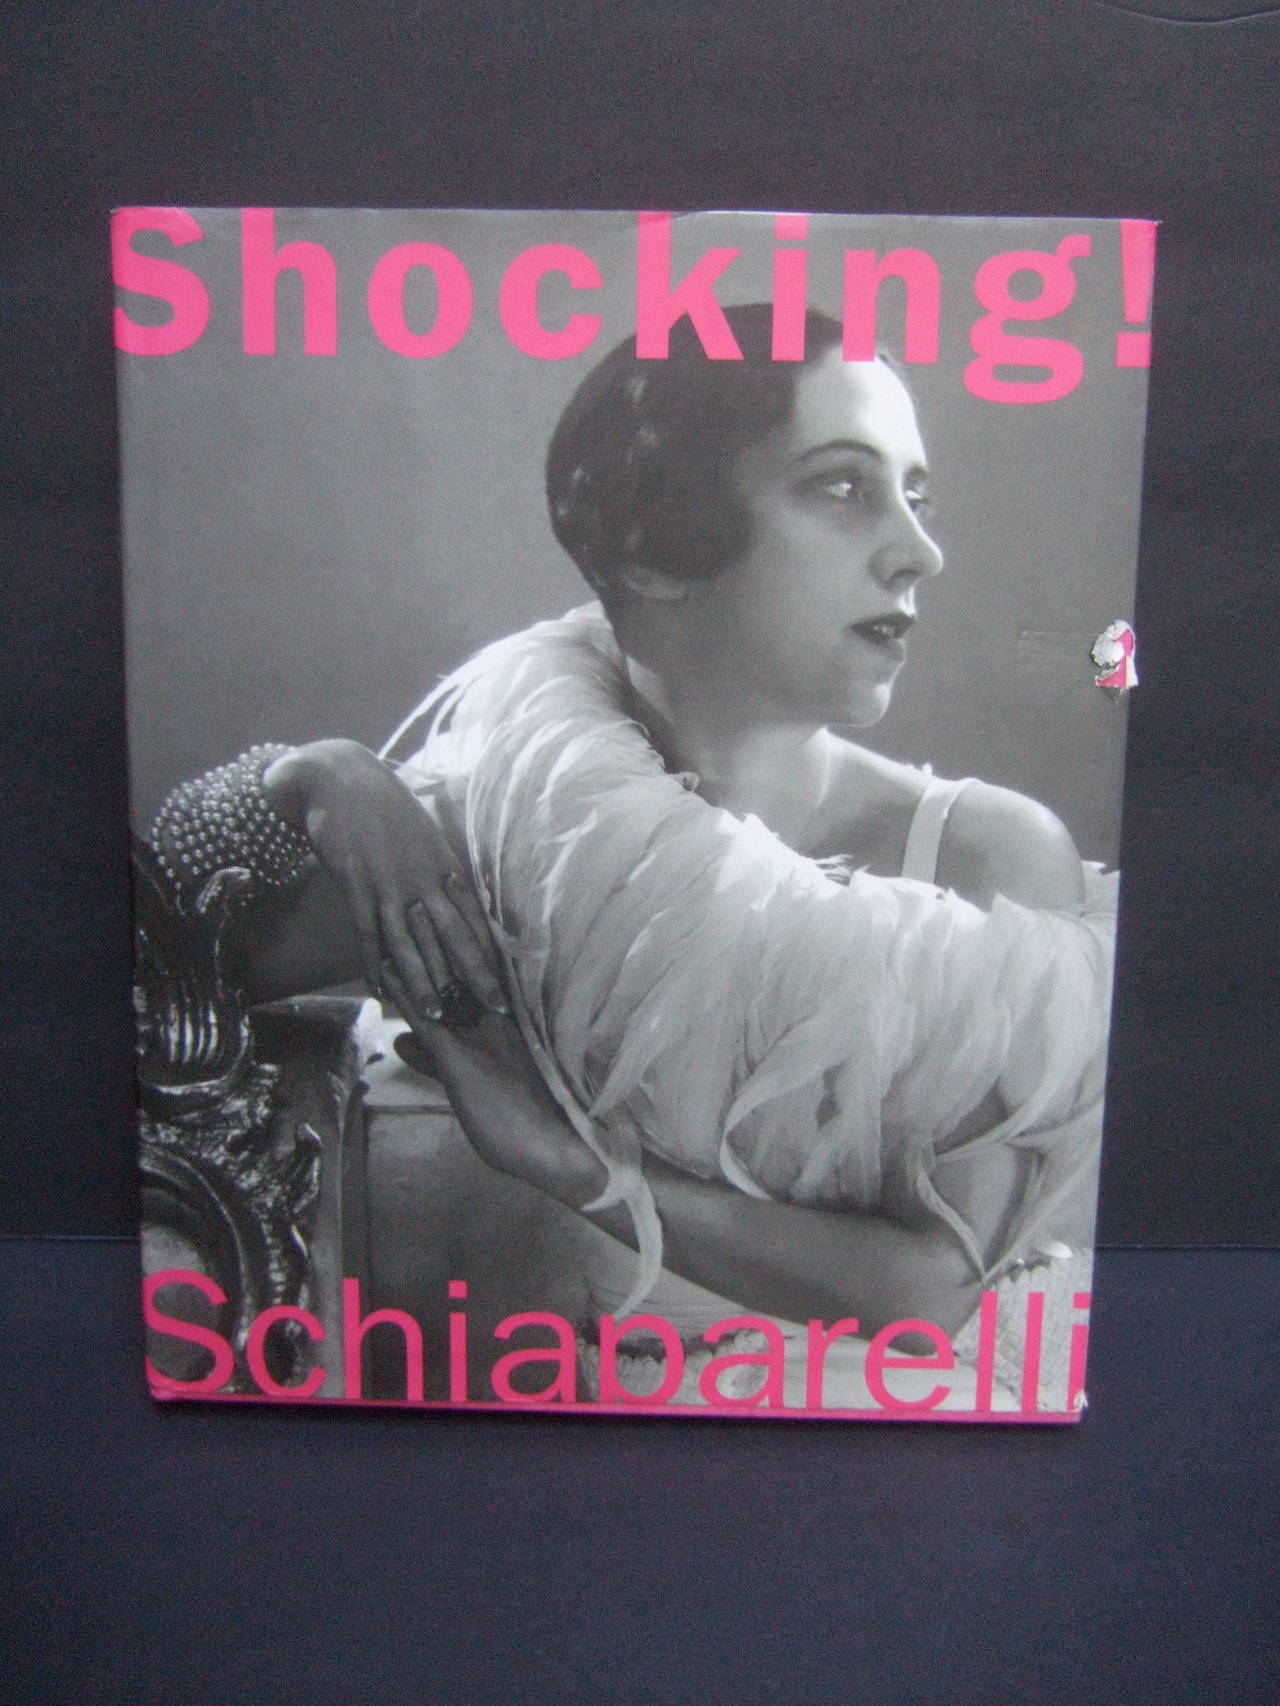 Shocking The art and fashion of Elsa Schiaparelli book 2003
The hardcover book is illustrated with numerous images
of Schiaparelli's avant-garde couture designs

The text chronicles her colorful life and career as one of the early 20th 
century